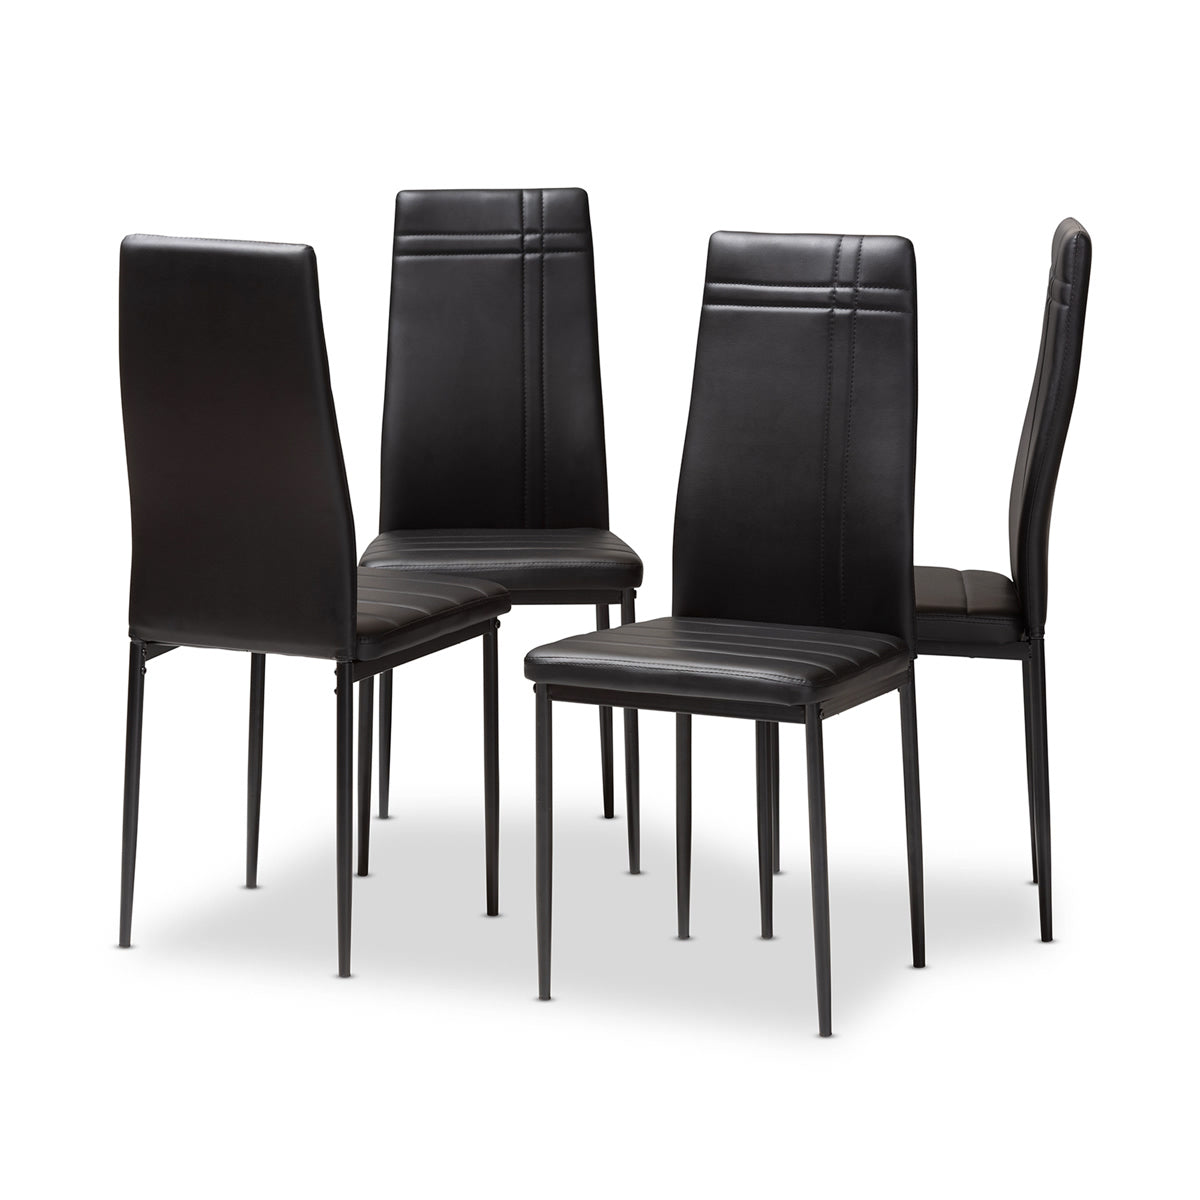 Baxton Studio Matiese Modern and Contemporary Black Faux Leather Upholstered Dining Chair (Set of 4) Baxton Studio-dining chair-Minimal And Modern - 1